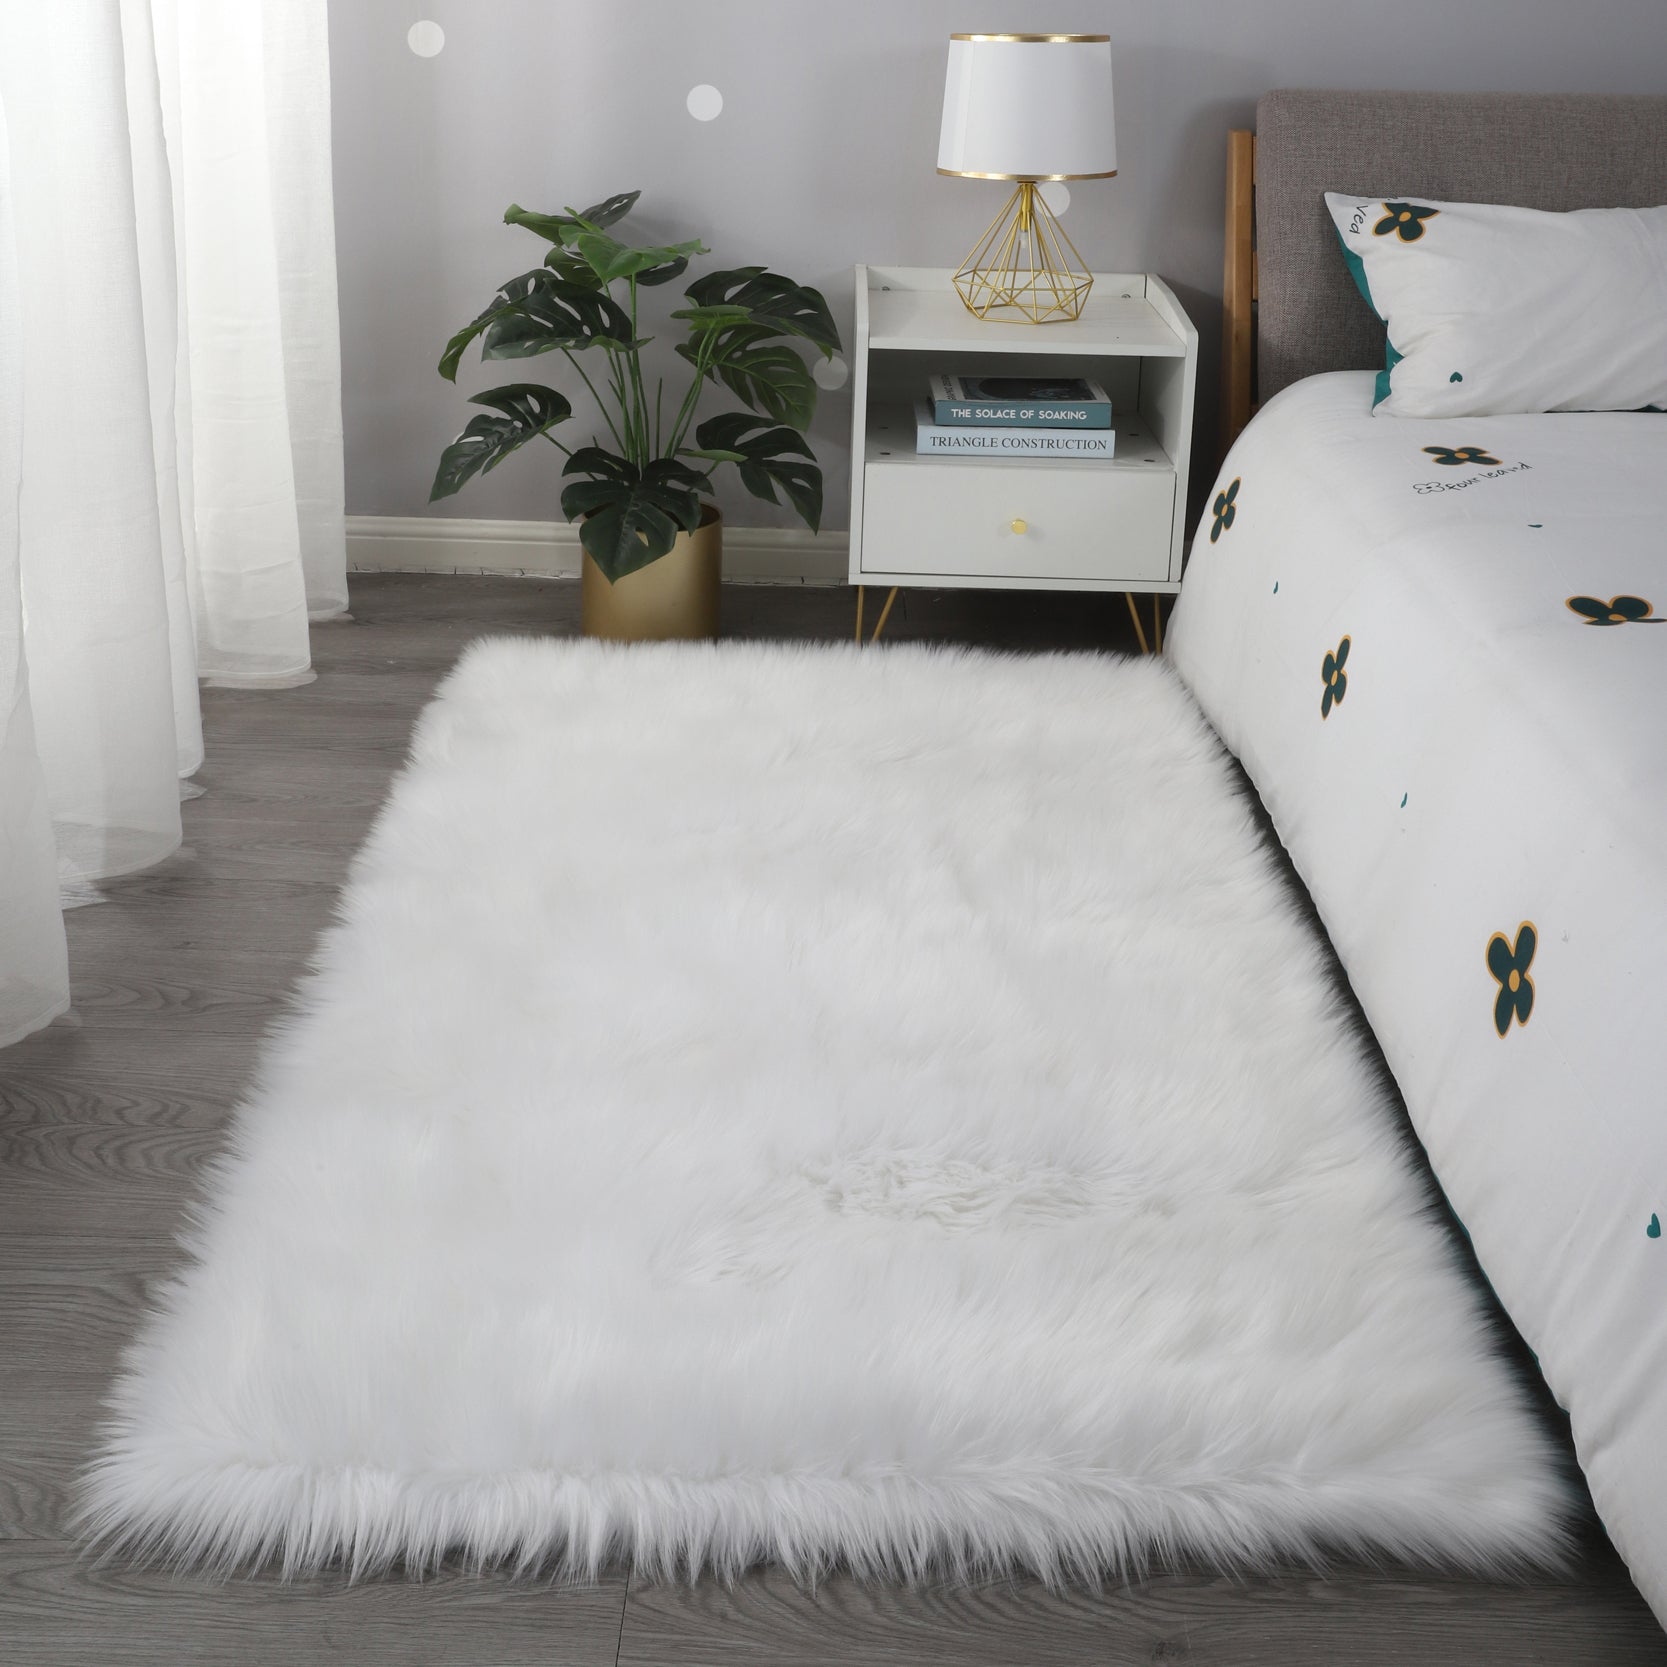 7' x 5' Cozy Collection Ultra Soft Fluffy Faux Fur Sheepskin Area Rug (White)